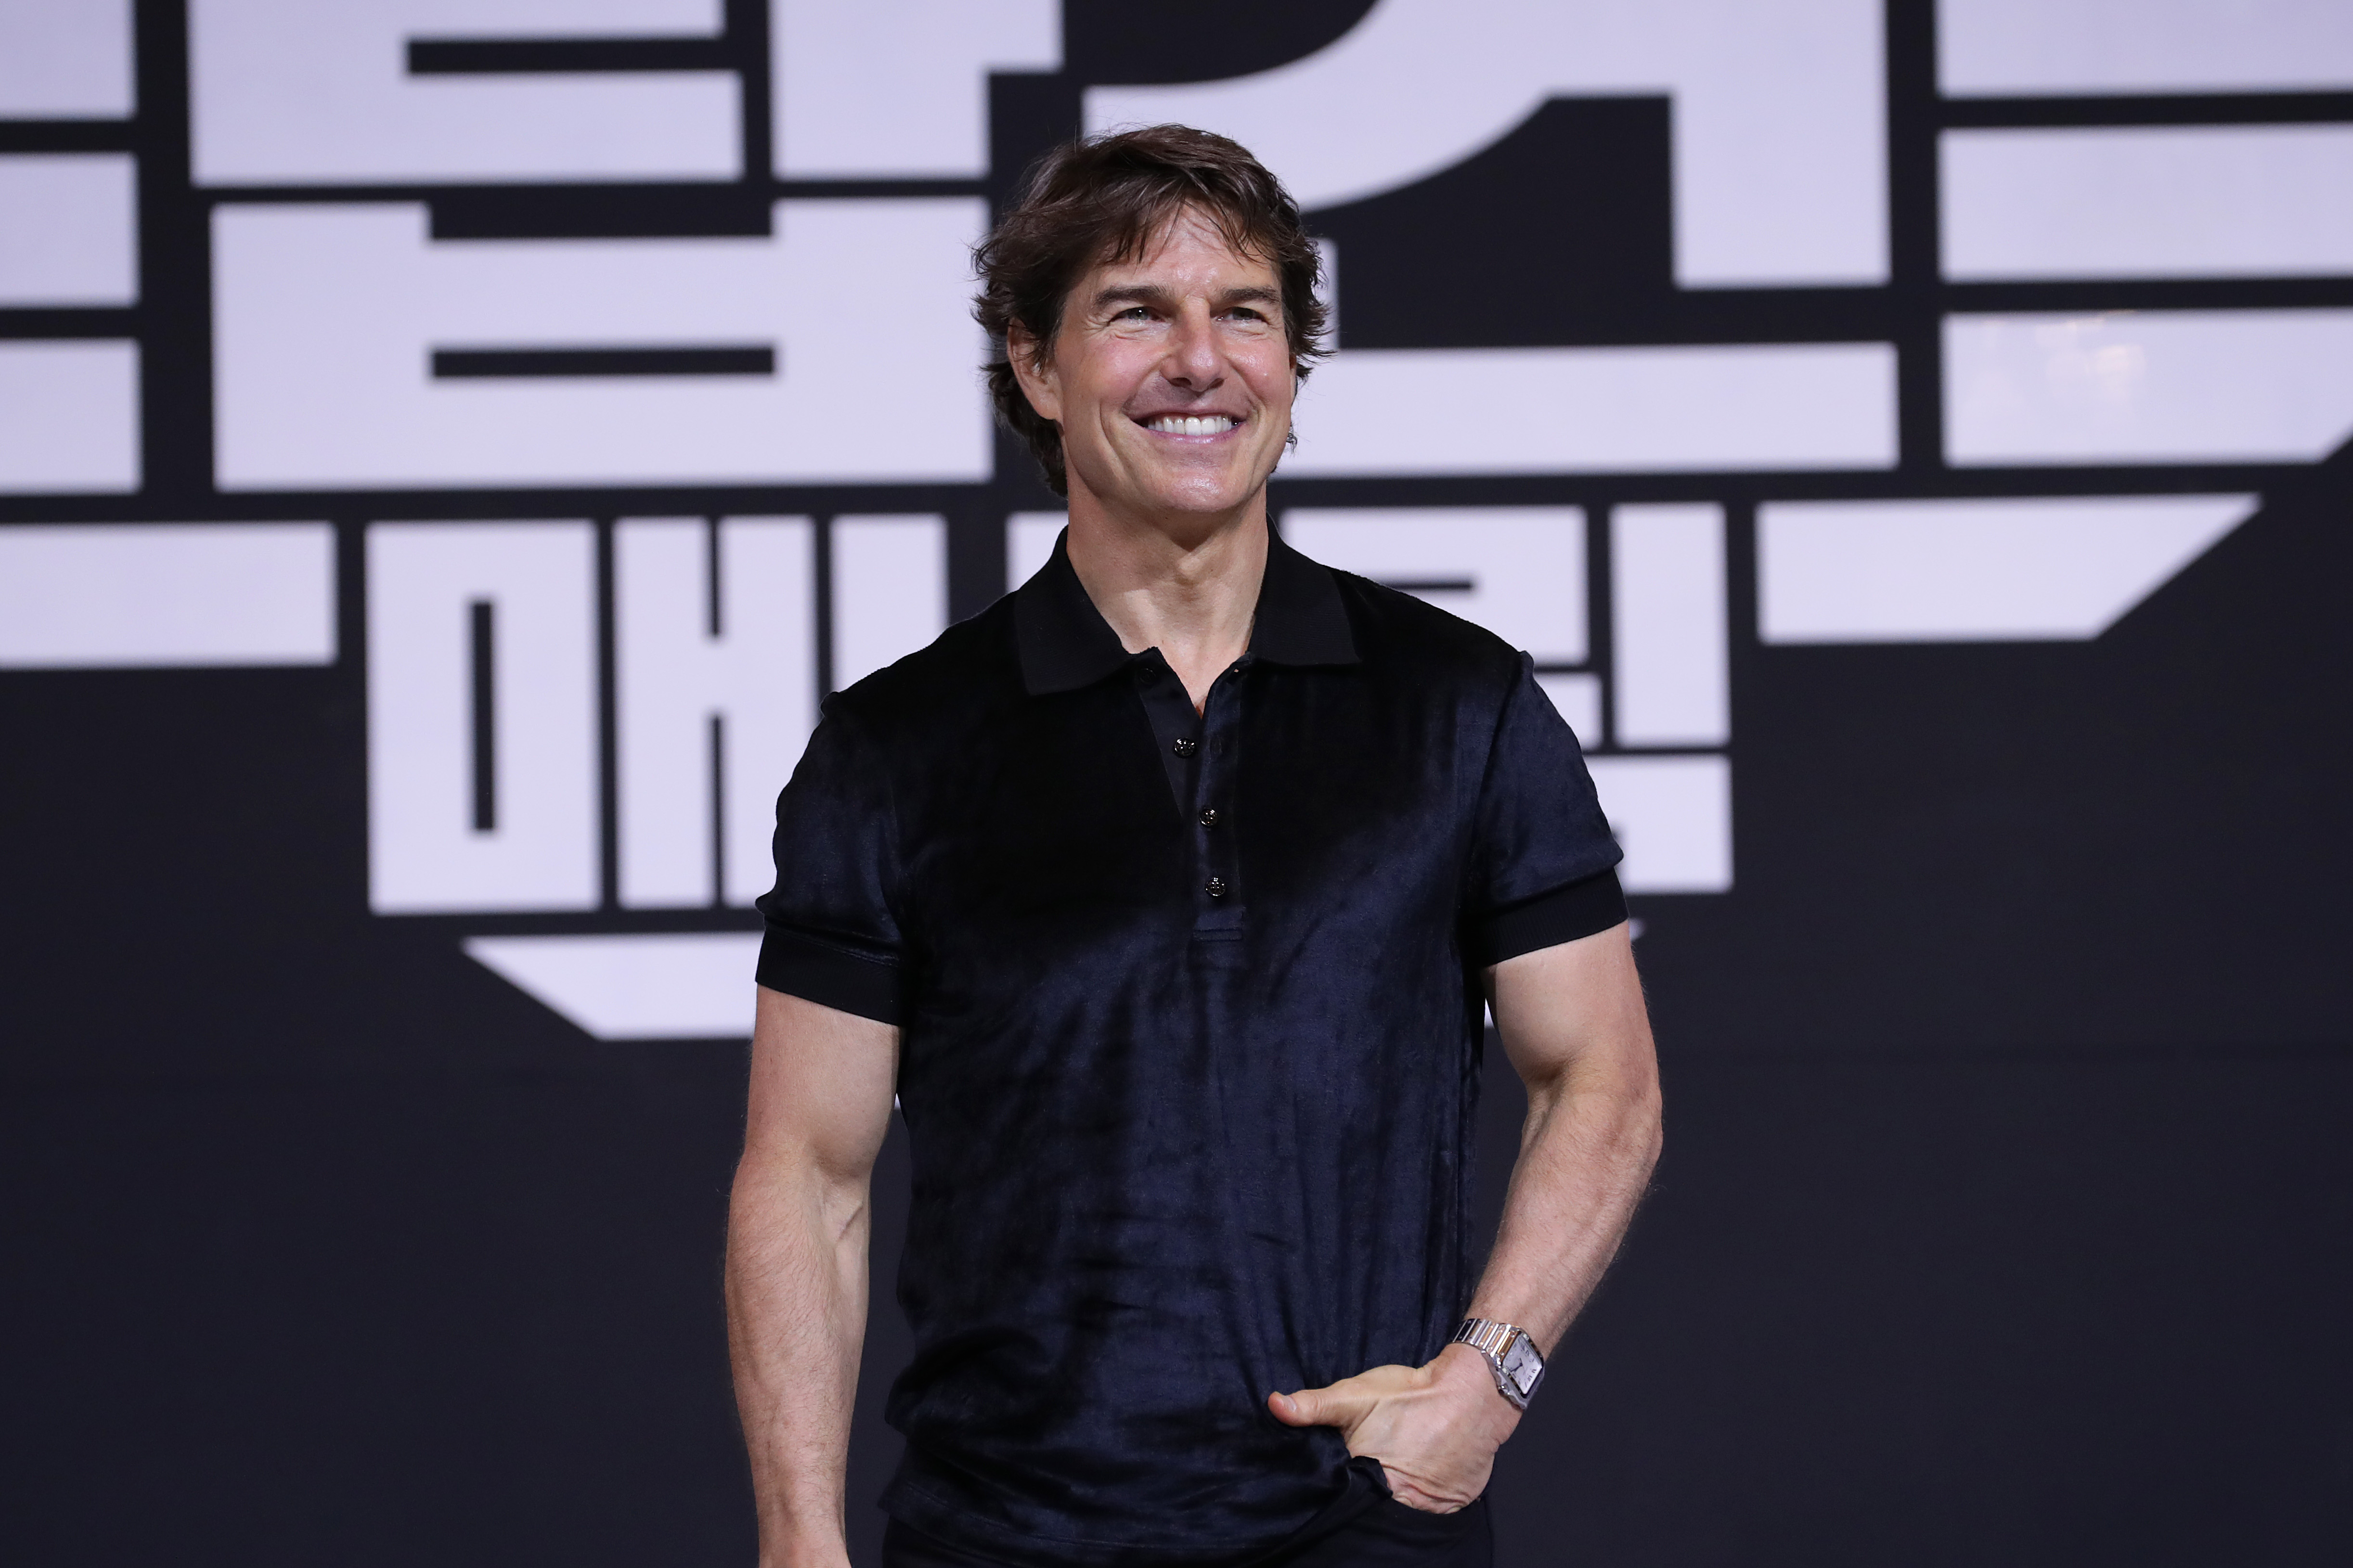 Tom Cruise attends a press conference in South Korea for Top Gun: Maverick, which continues to excel at the box office and avoid streaming